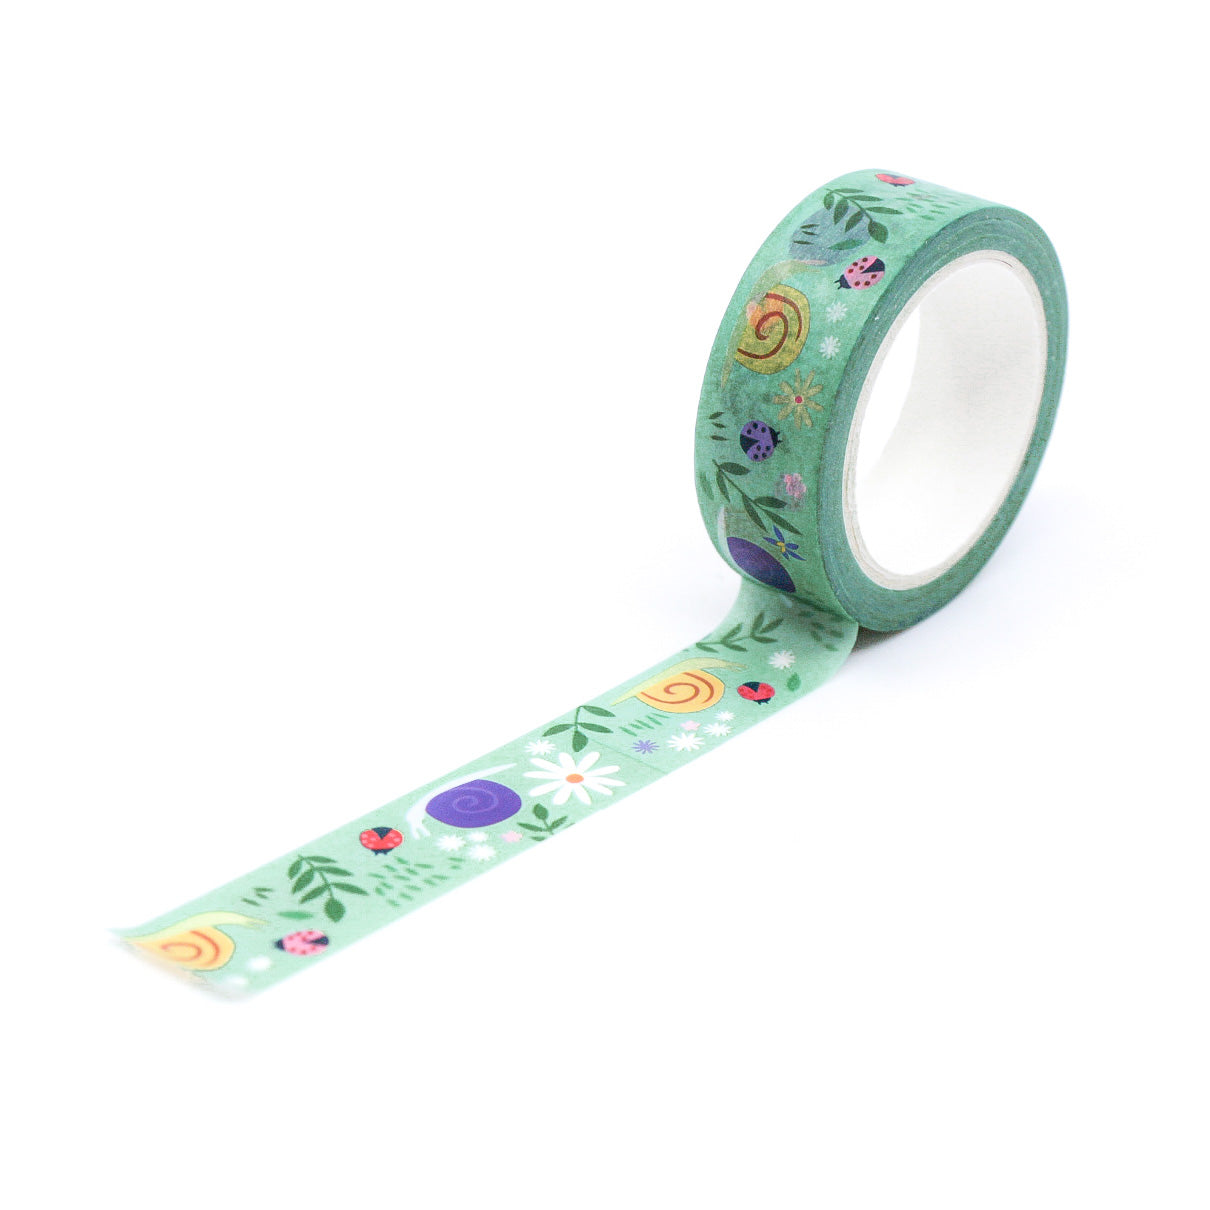  Garden Snail Washi Tape features charming illustrations of garden snails, perfect for adding a whimsical touch to your crafts, journals, and projects. This tape is from Girl of All Work and sold at BBB Supplies Craft Shop.